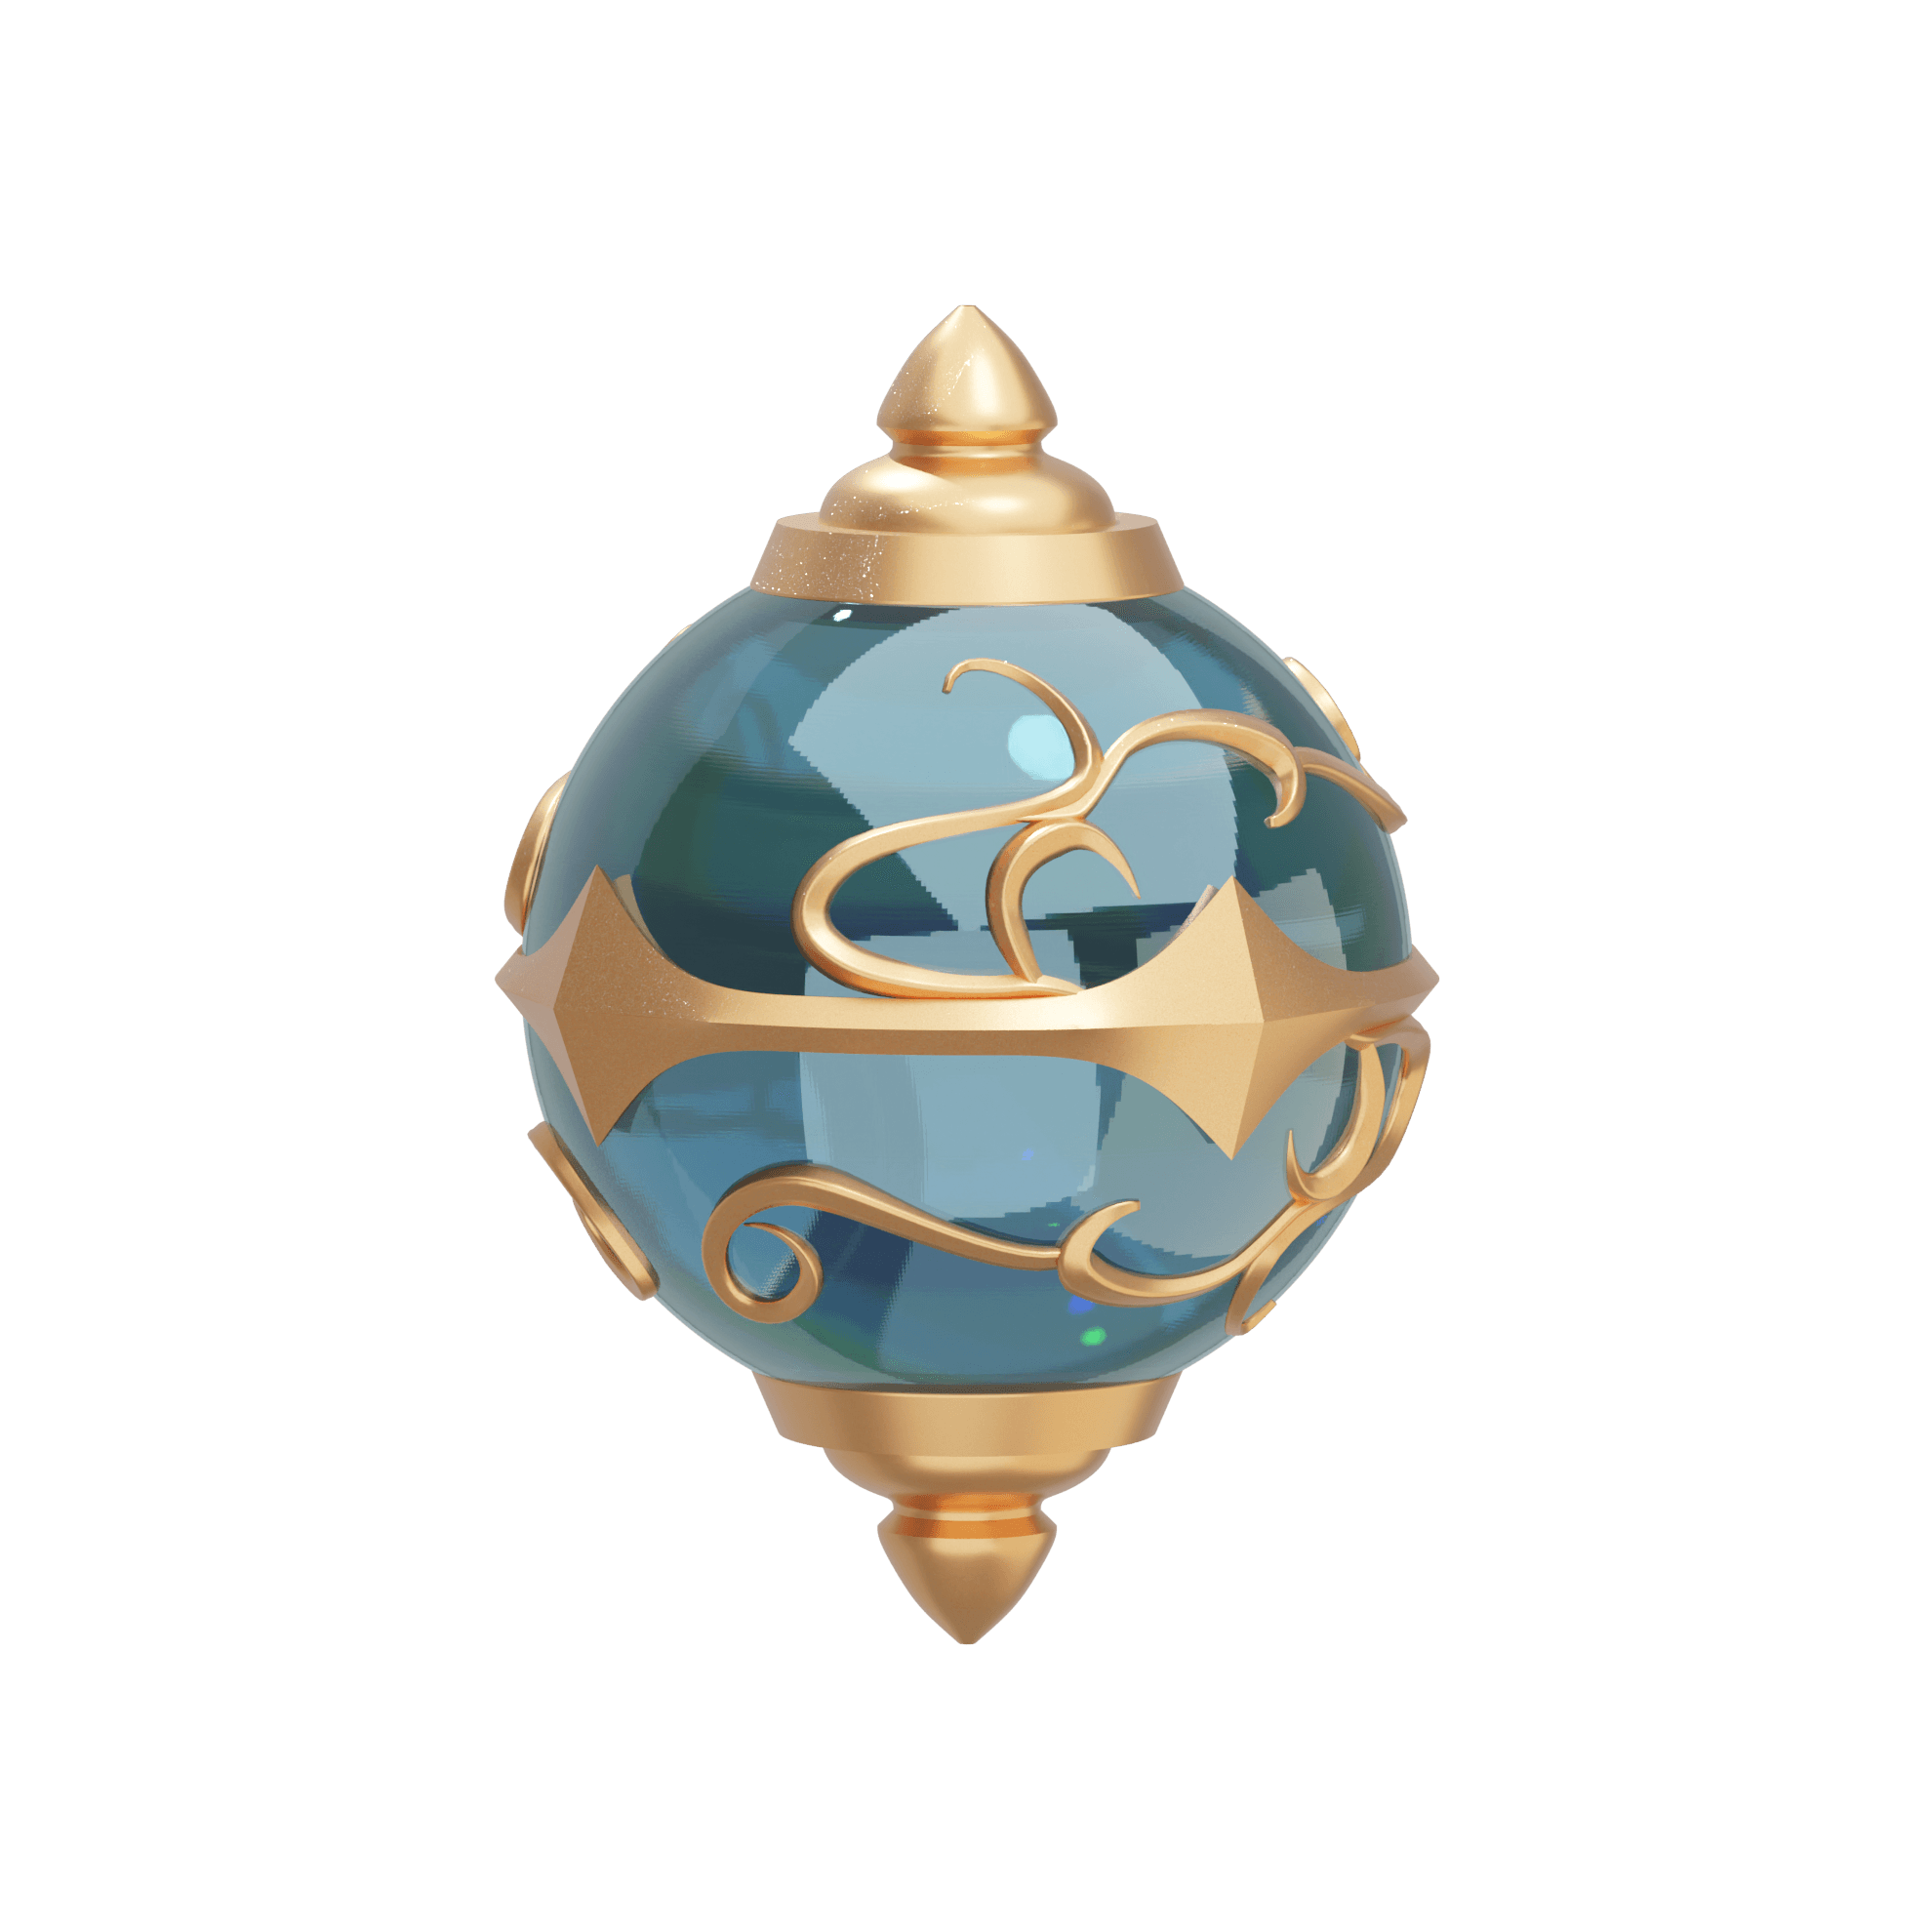 Pay Sphere Container 3d model